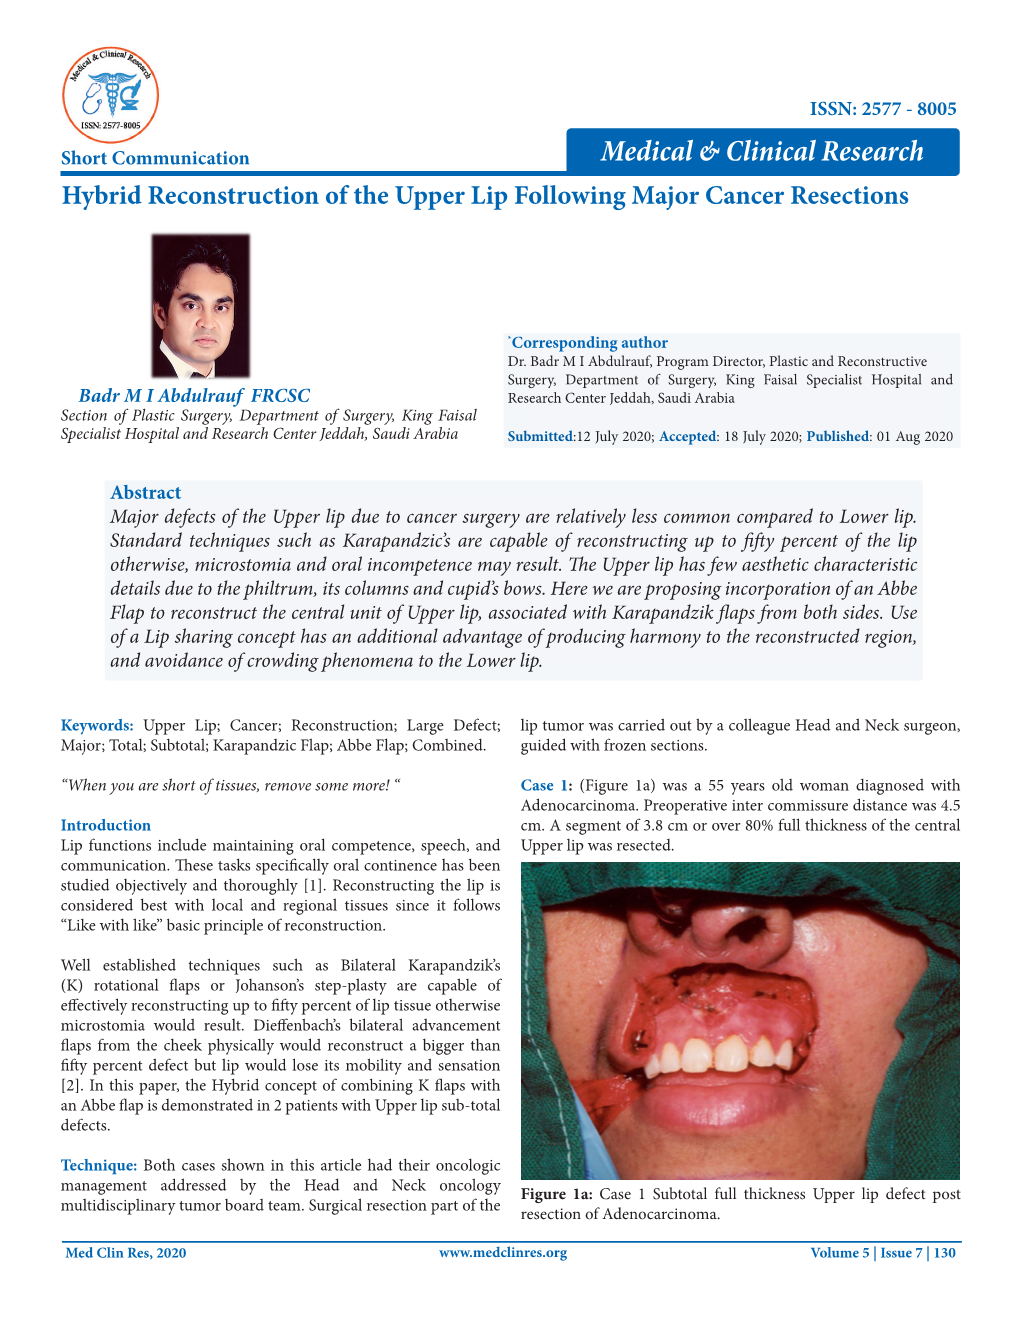 Hybrid Reconstruction of the Upper Lip Following Major Cancer Resections